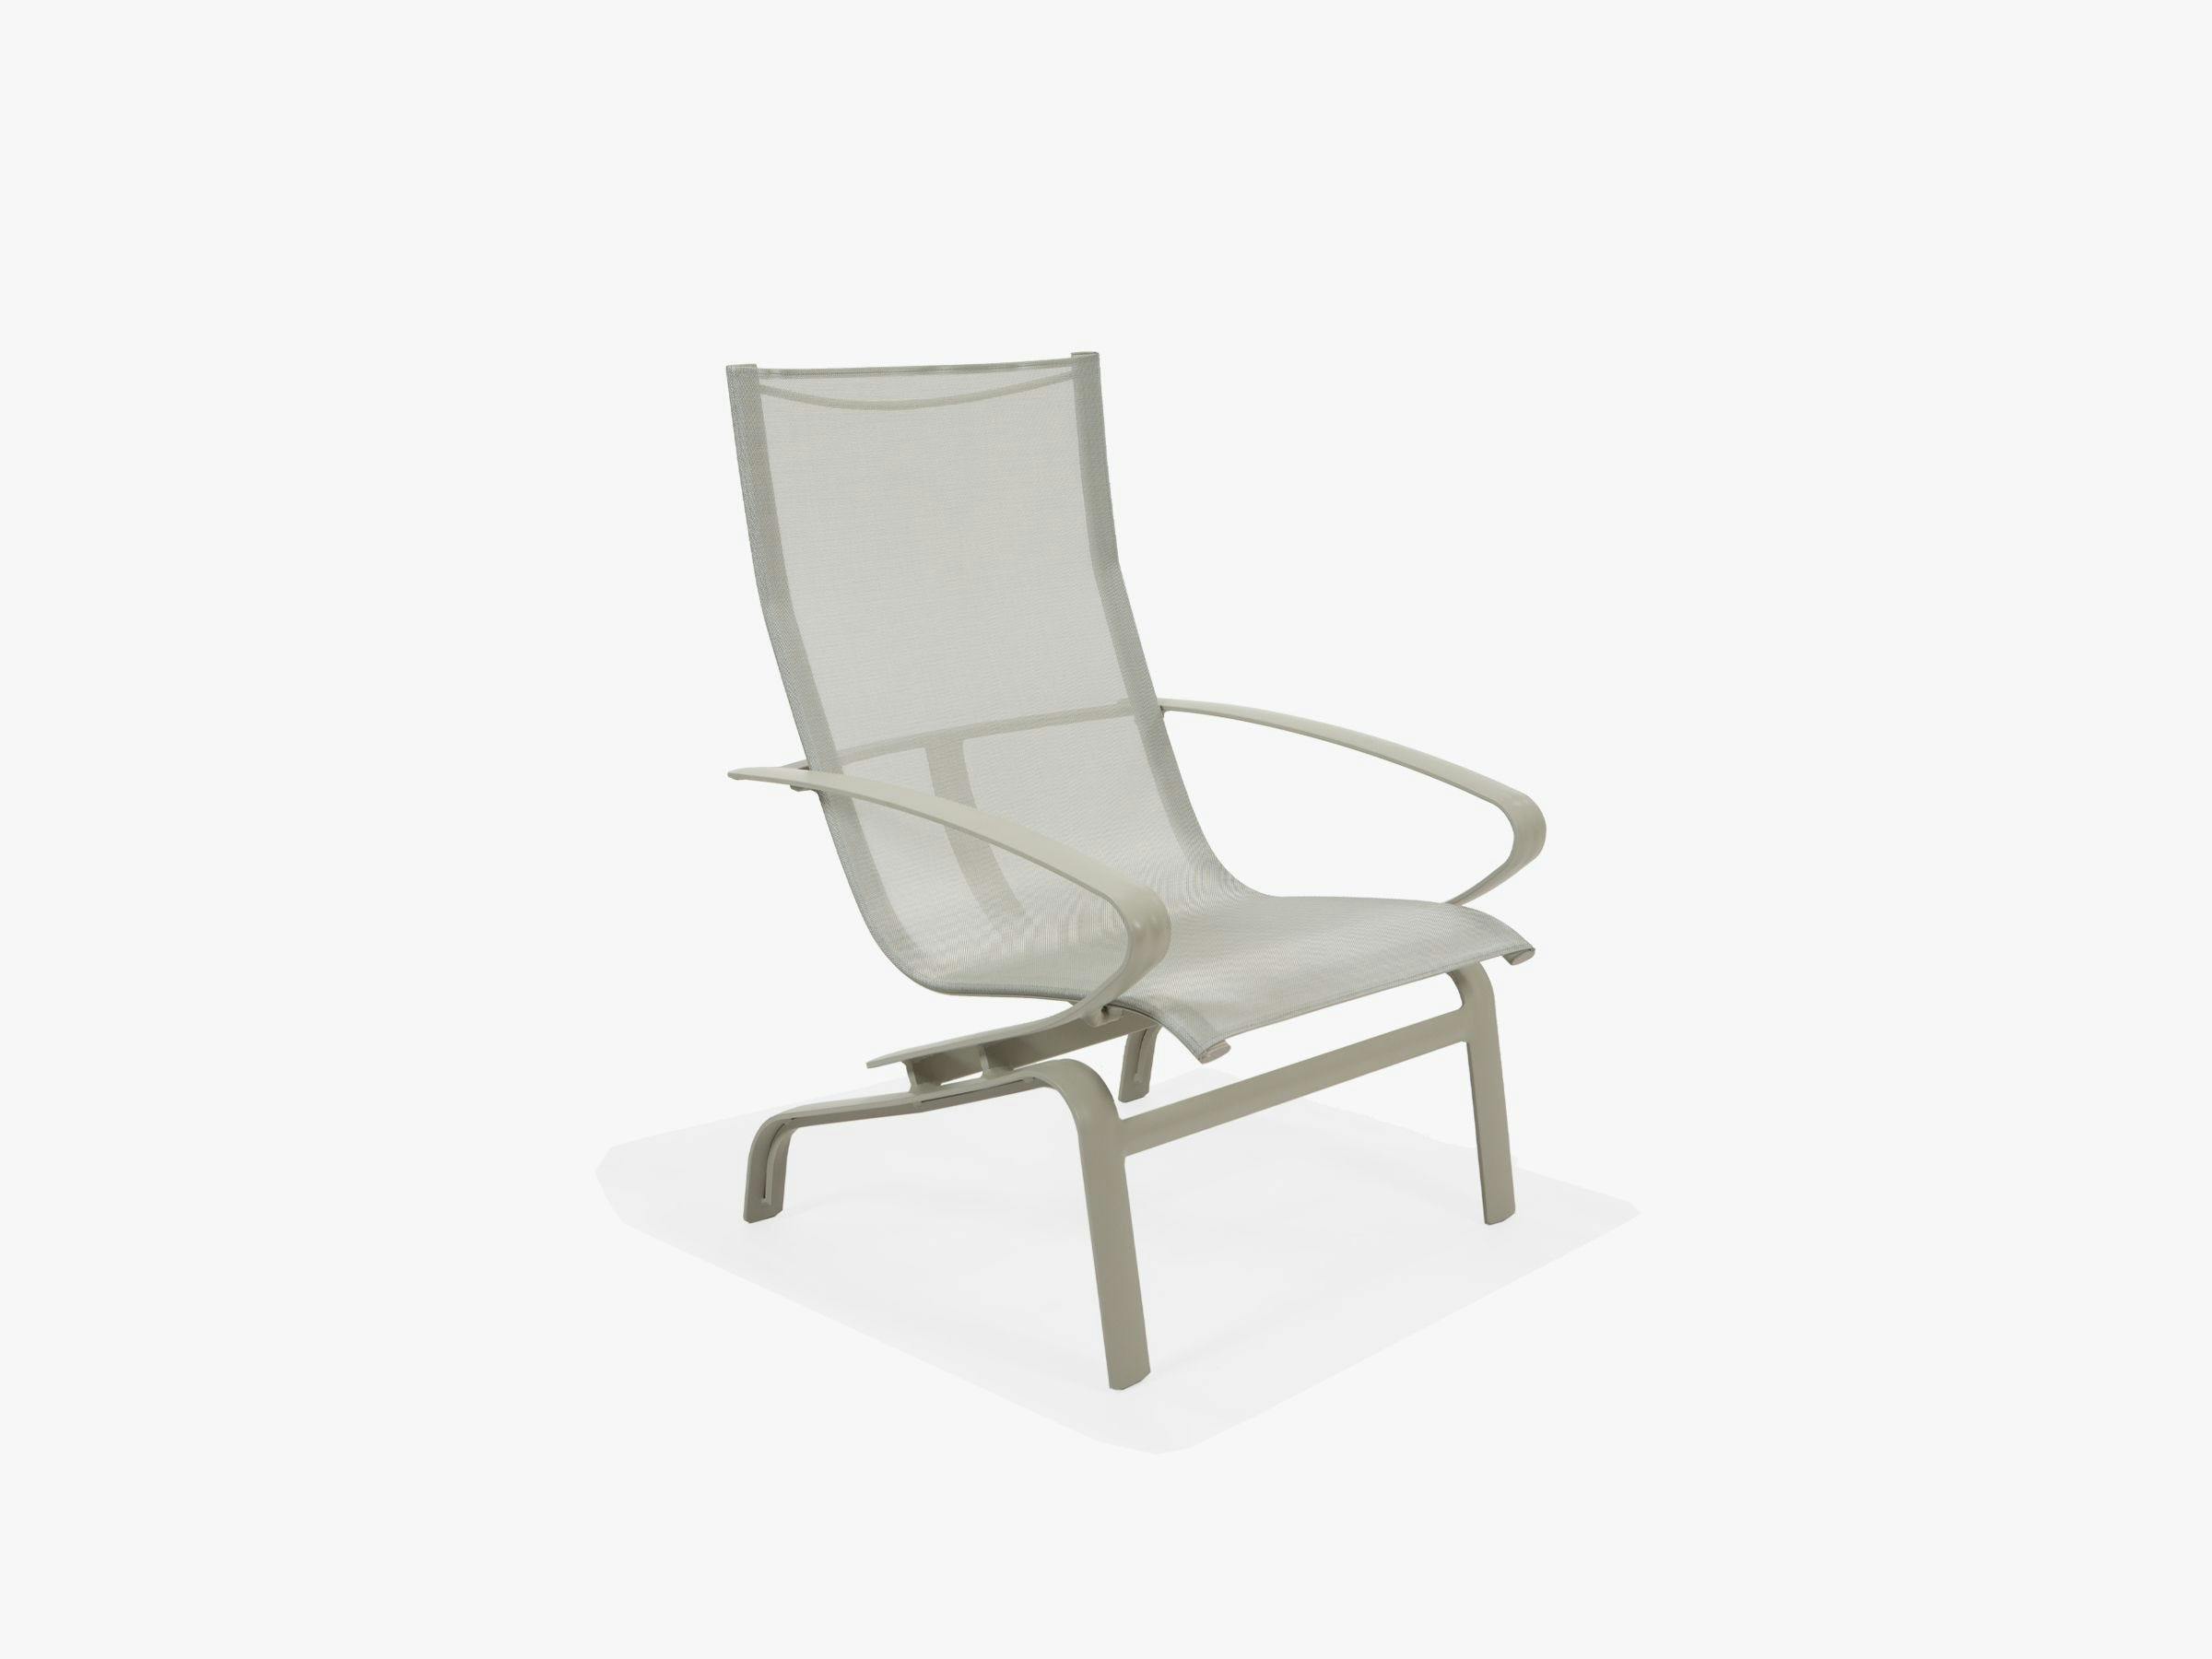 Edge Sling Chat Chair